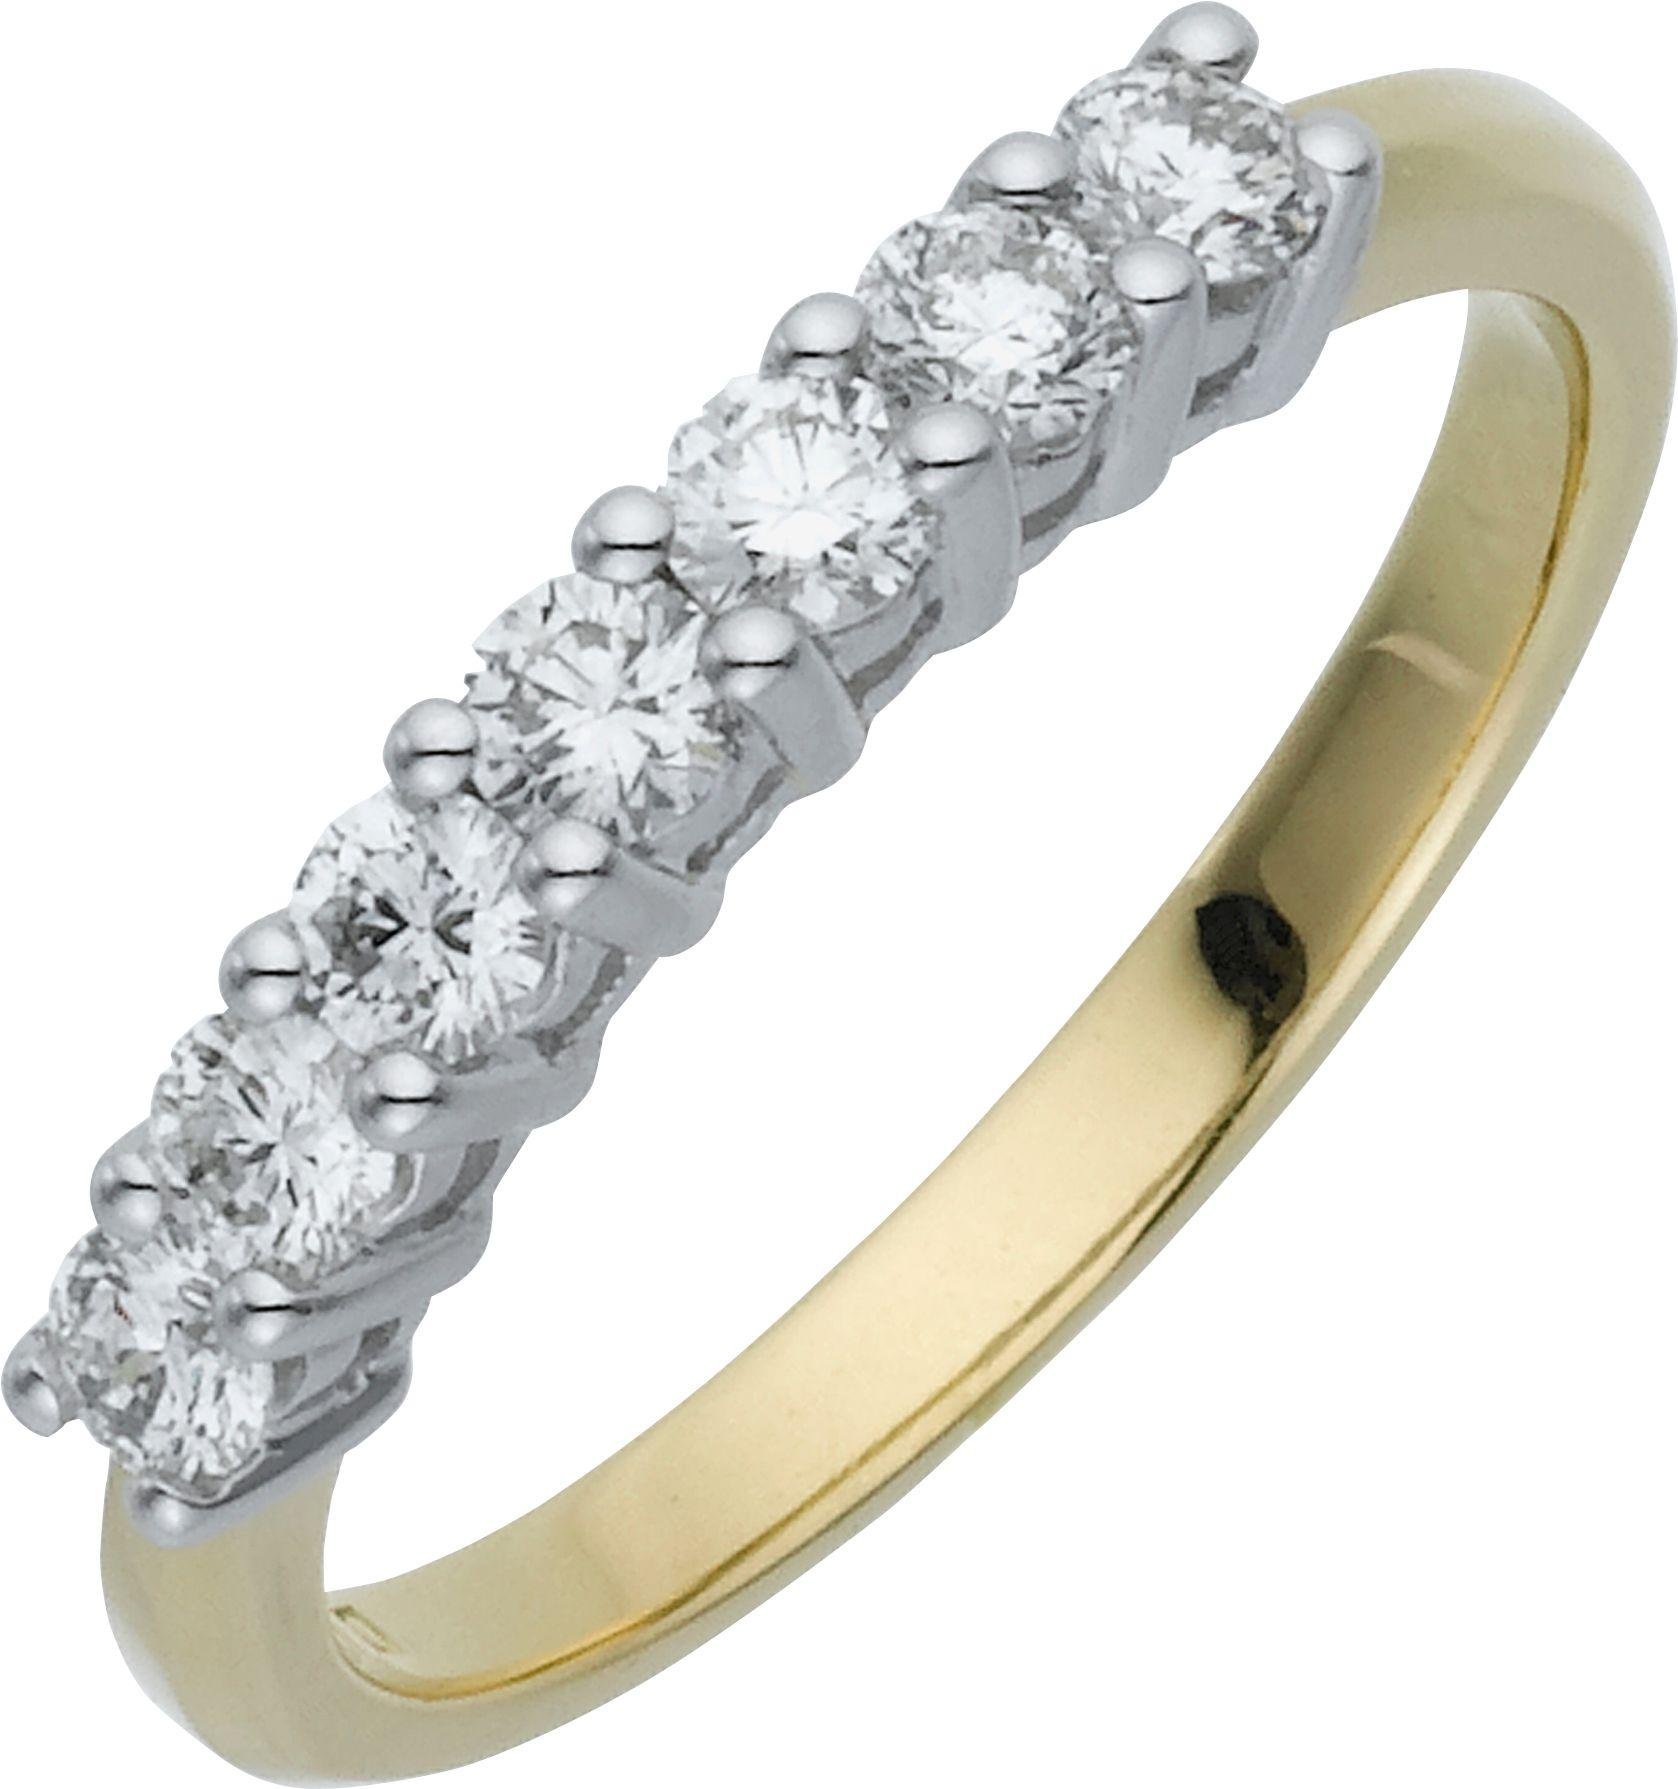 Everlasting Love 9ct Gold 7 Stone Eternity Ring - Size R